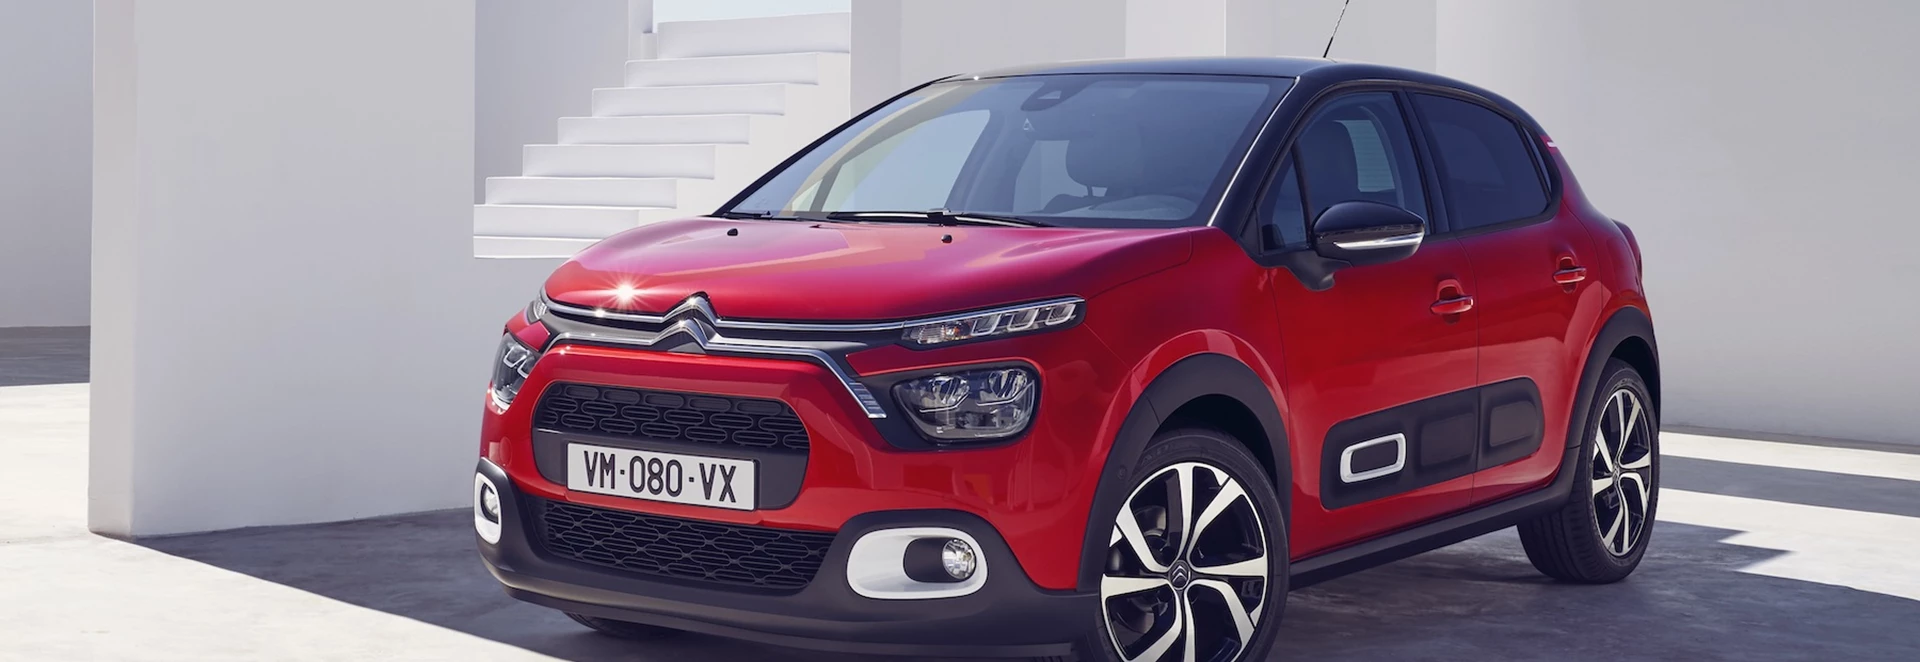 Refreshed Citroen C3 revealed with new look and safety tech